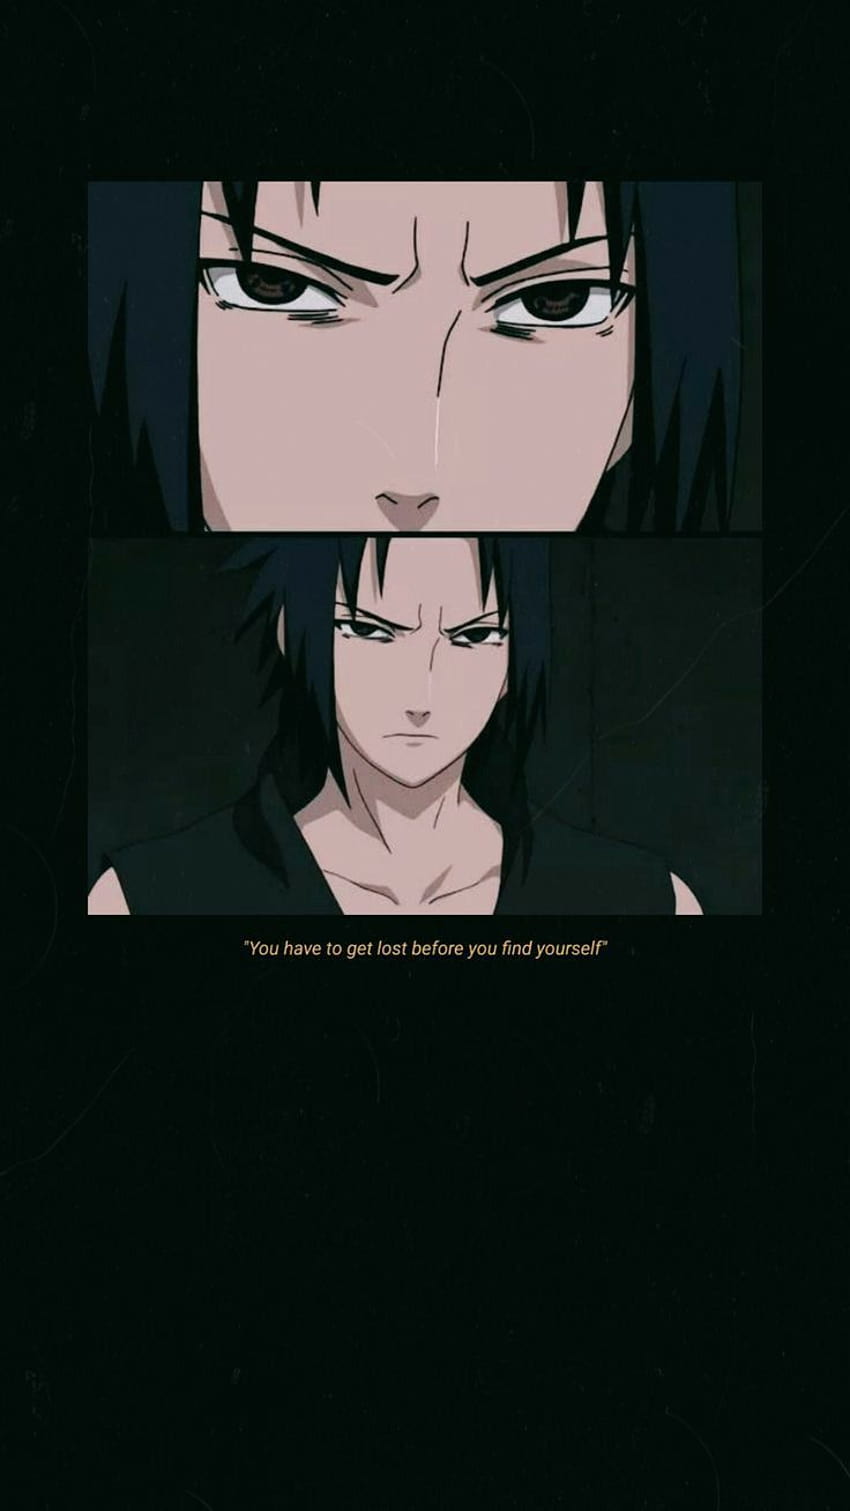 Anime wallpaper with two different faces - Sasuke Uchiha